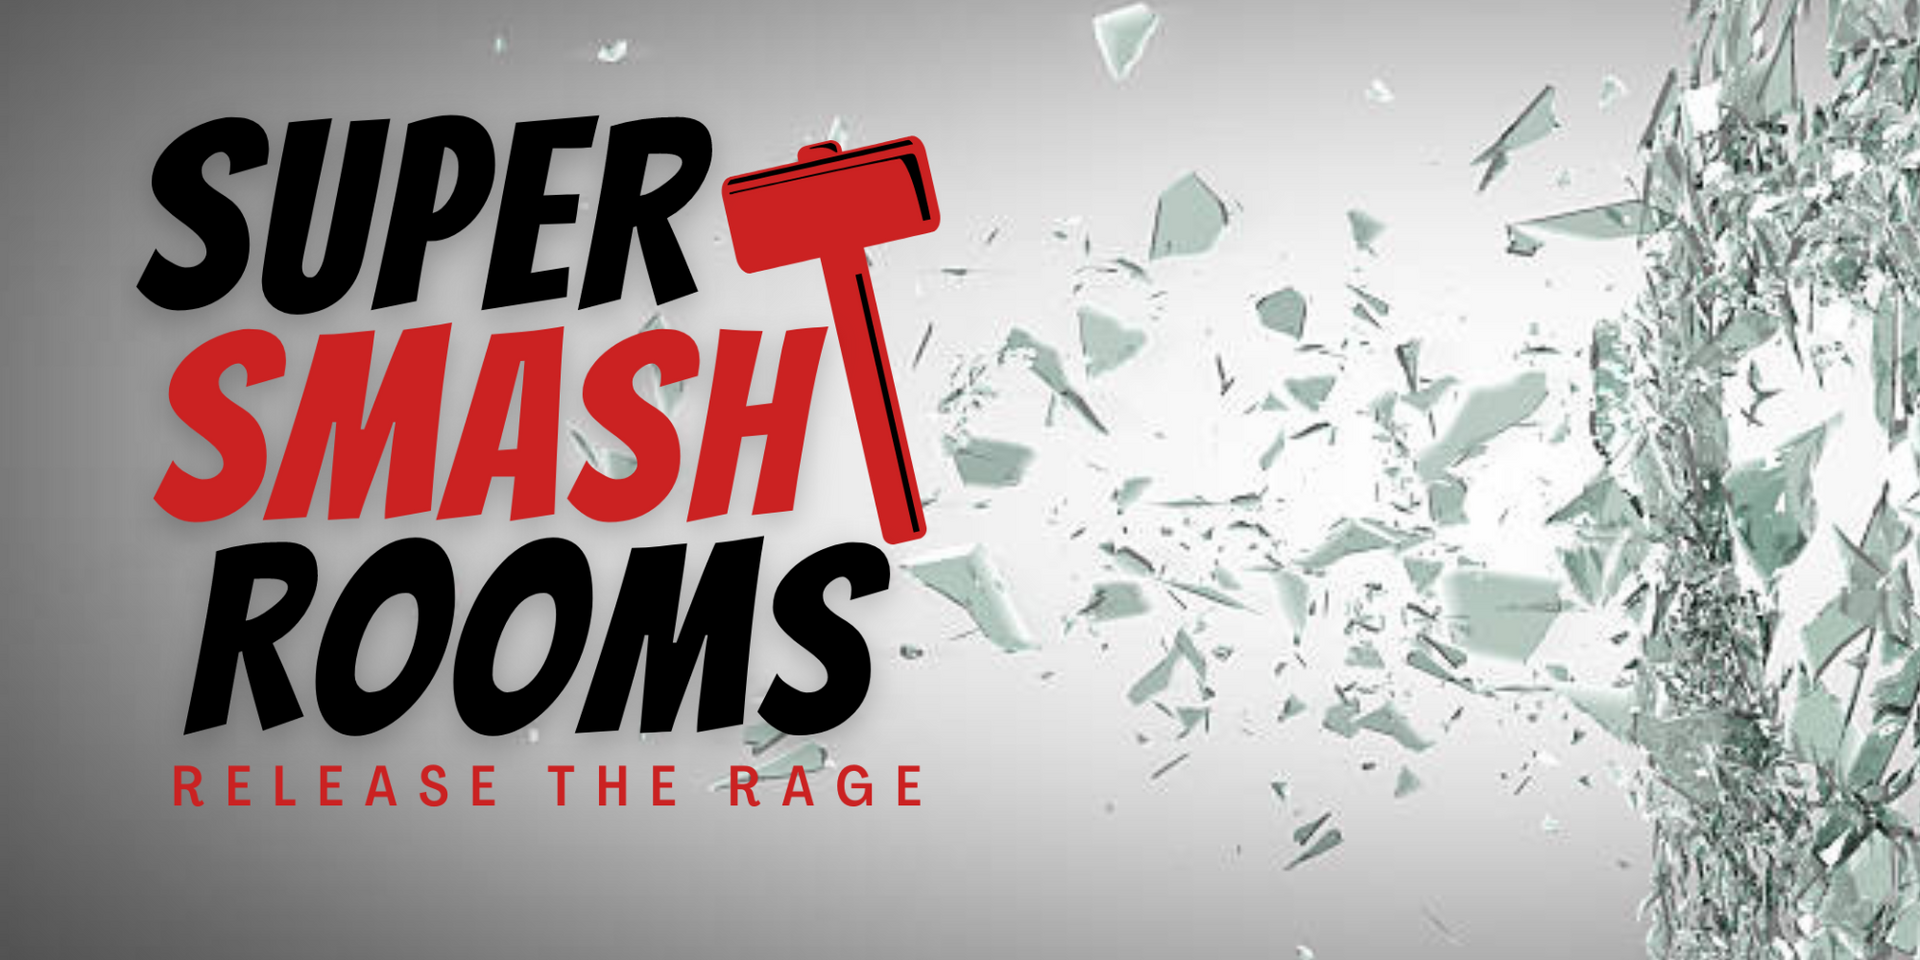 A poster for super smash rooms with a red hammer and broken glass